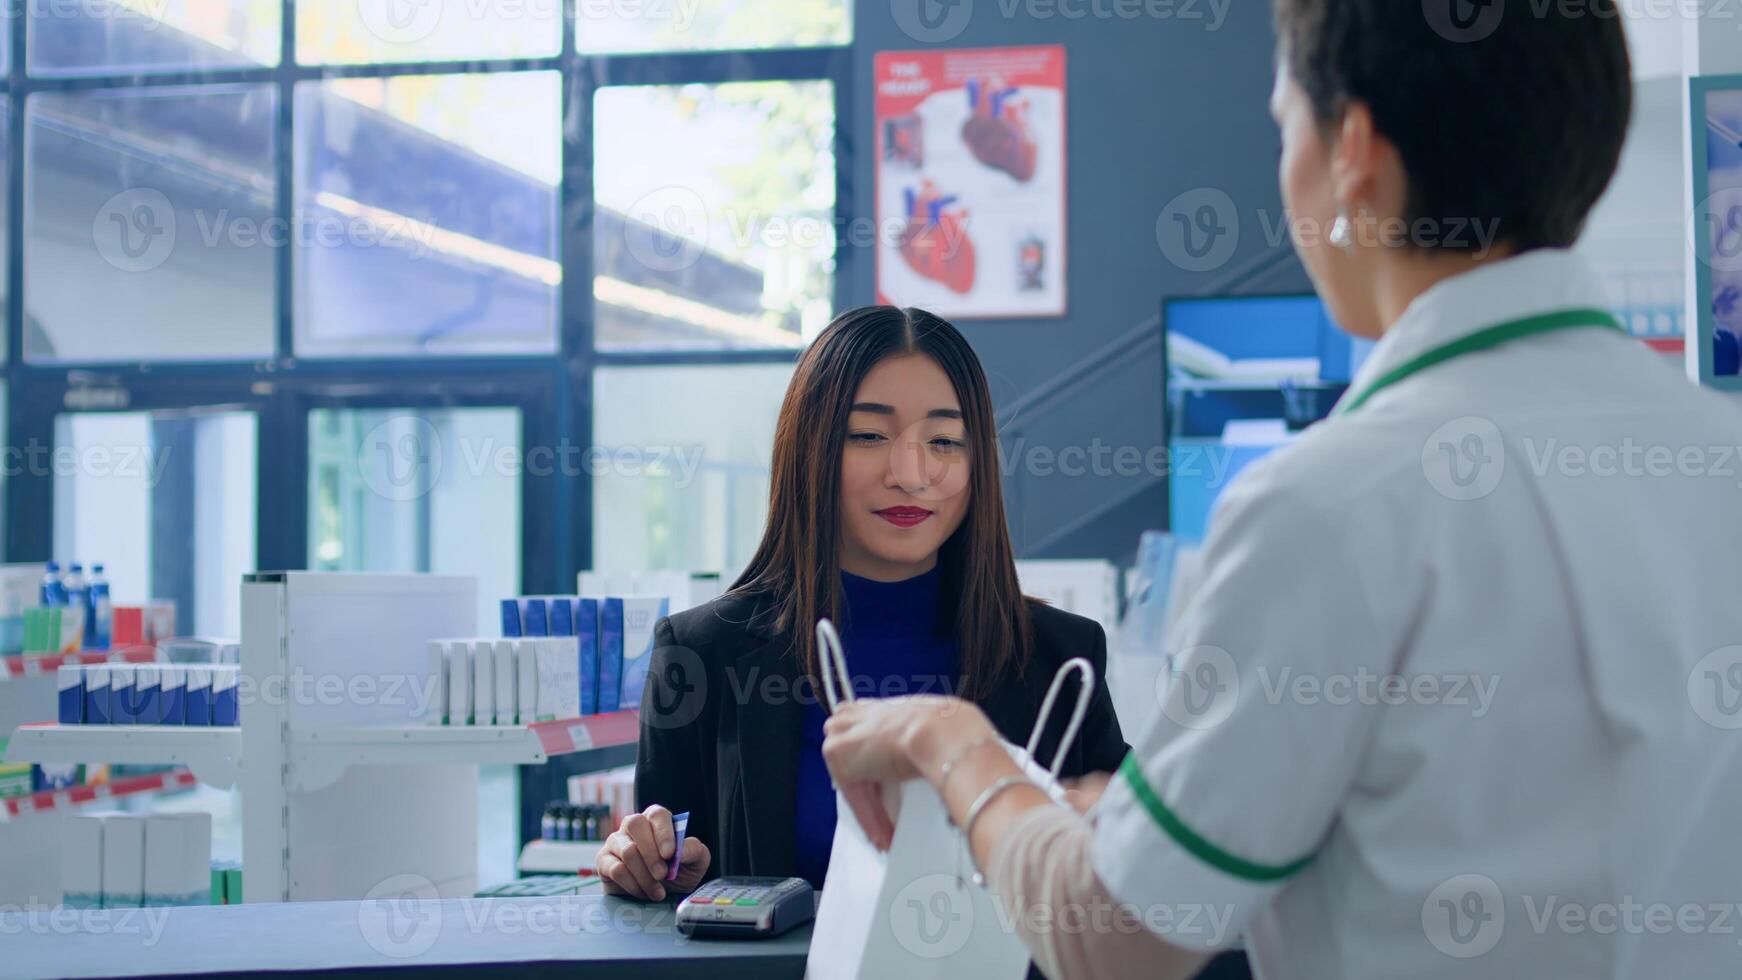 Asian woman in drugstore at checkout counter using credit card to purchase medical items. Happy customer doing contactless paying in pharmacy after finding needed virus stopping pills photo